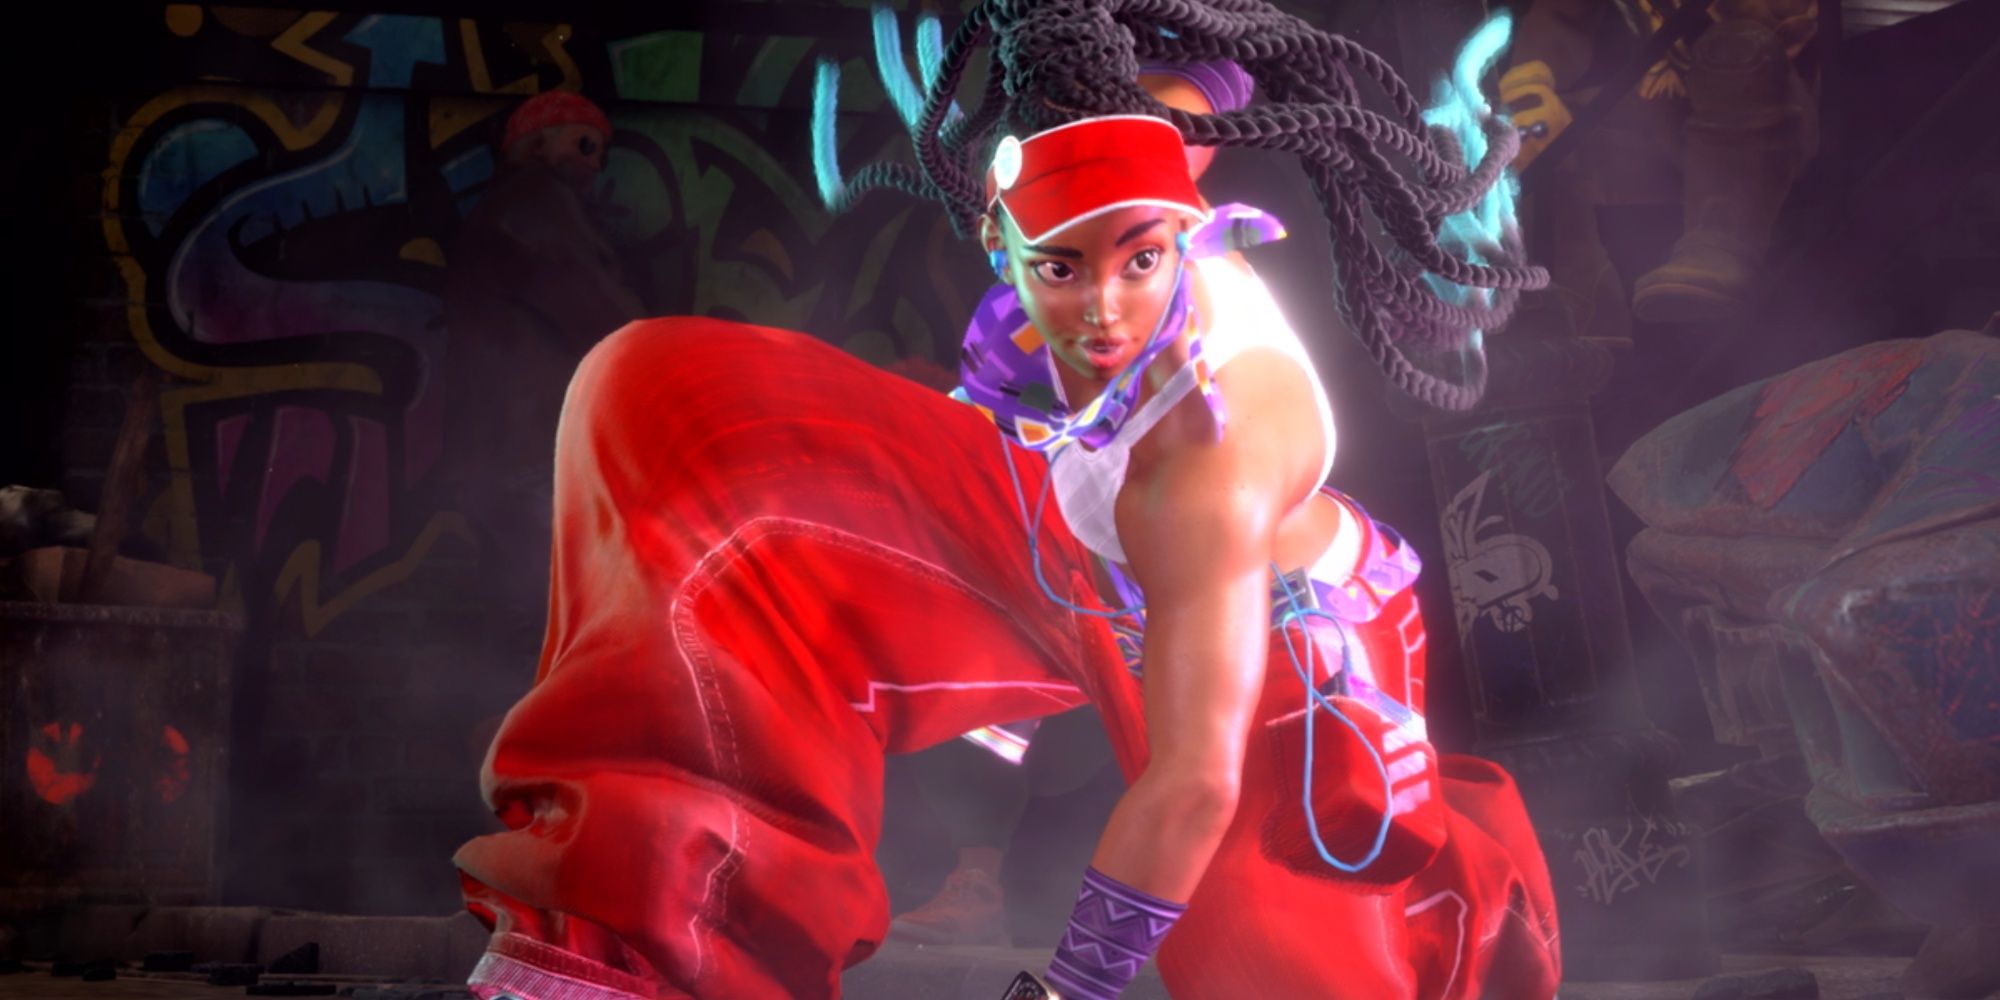 Kimberly posing in her alternate outfit in Street Fighter 6